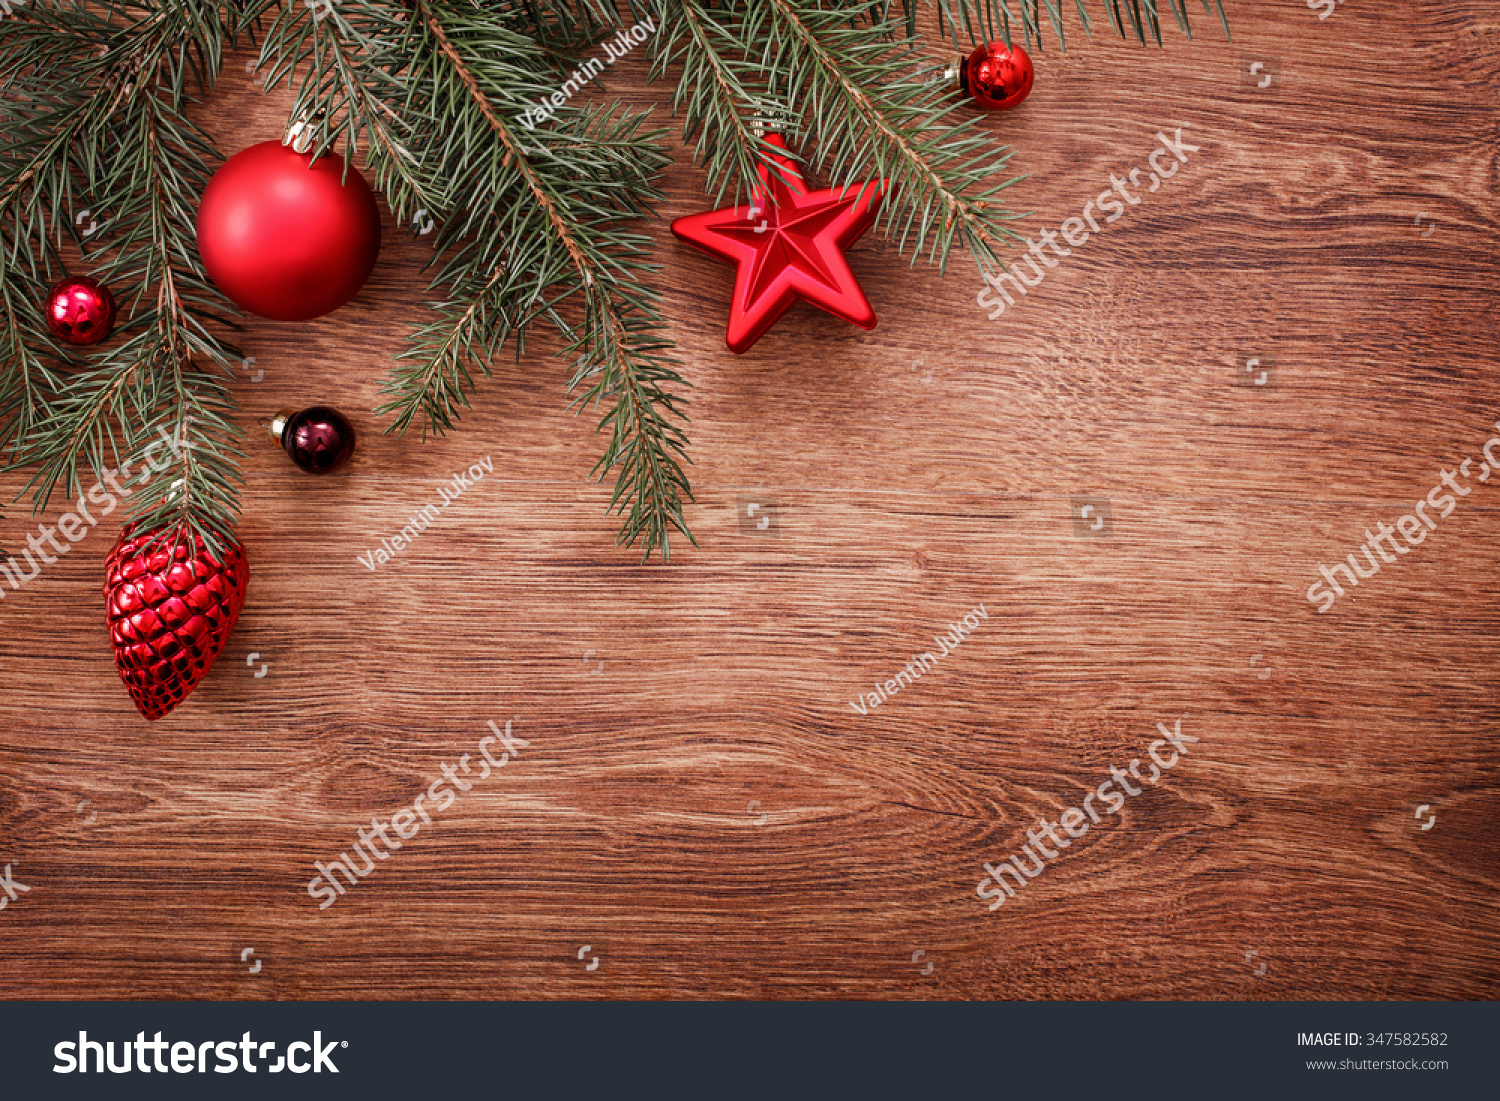 Red Christmas Ornaments Fir Tree Branch Stock Photo 347582582 ...